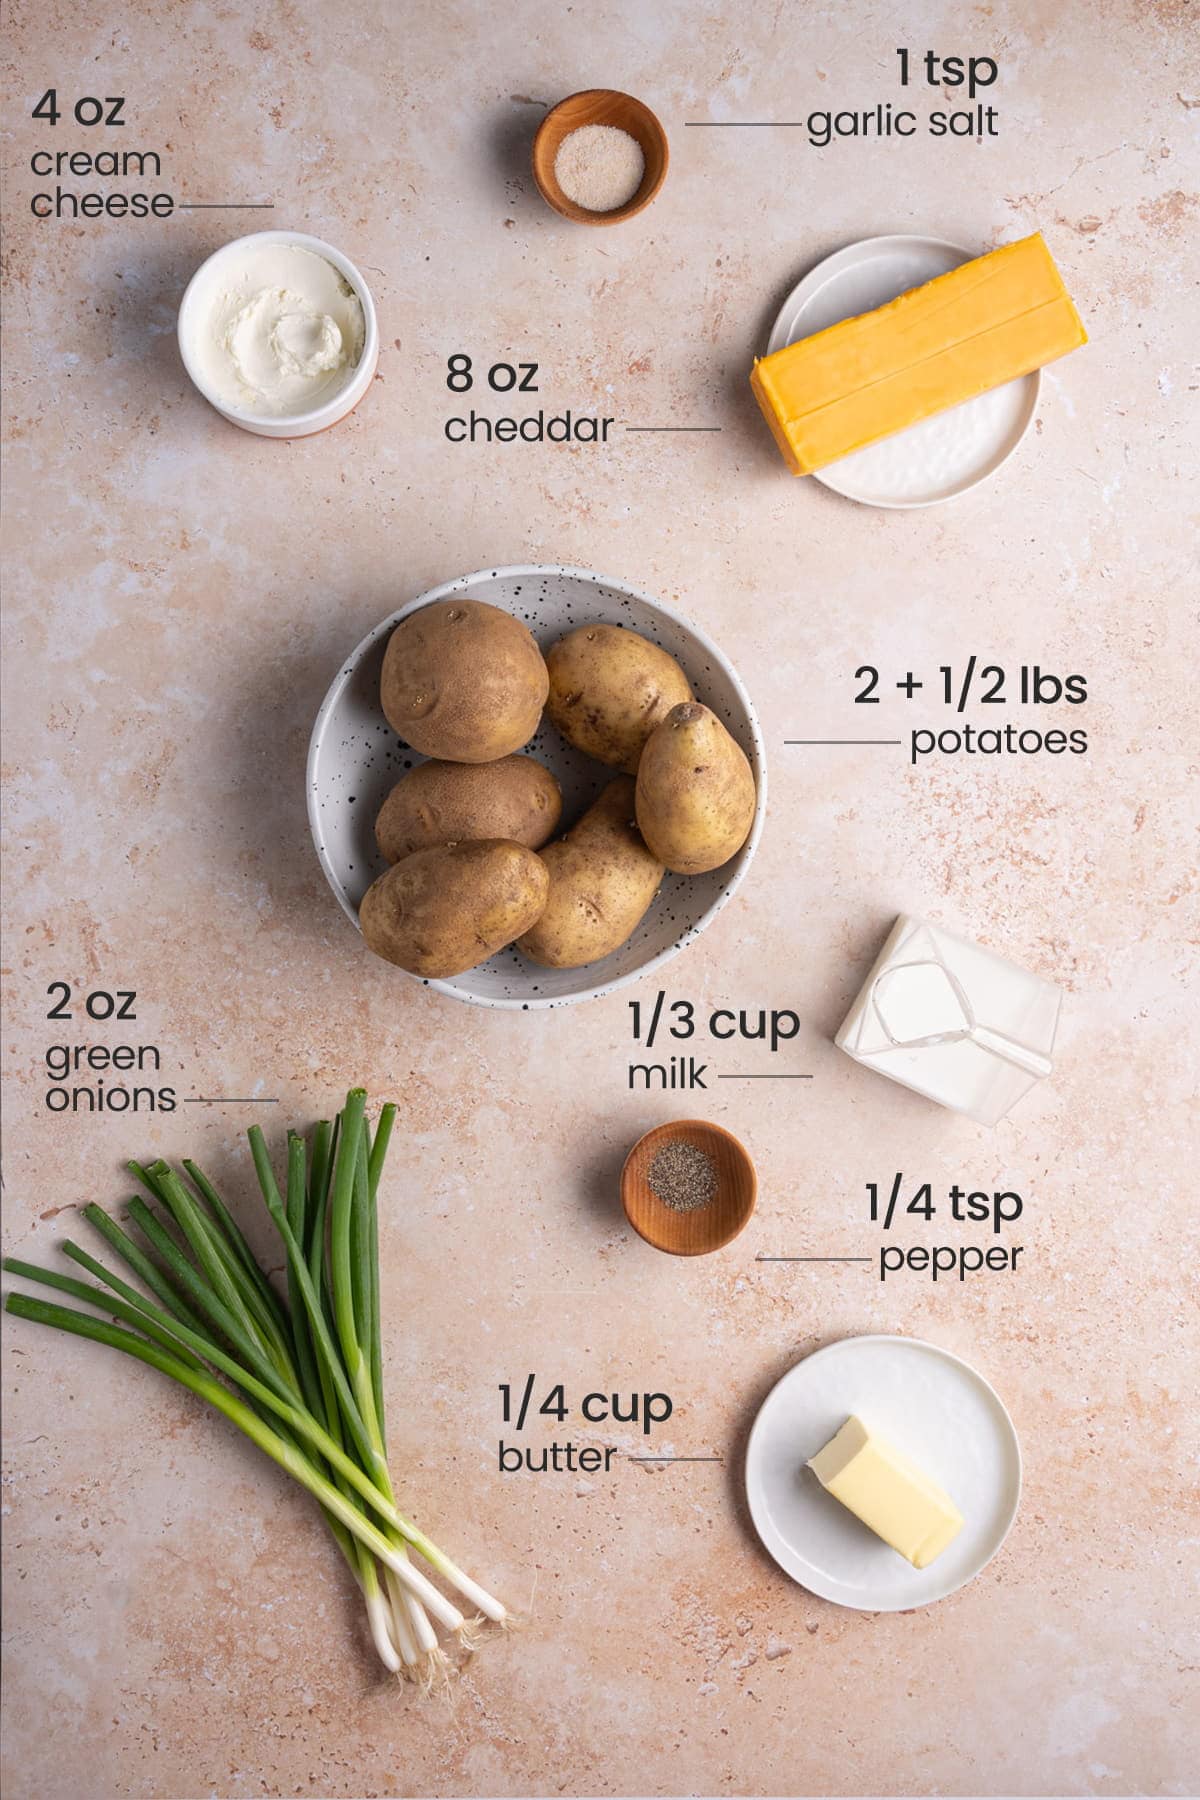 ingredients for twice-baked mashed potatoes - garlic salt, cream cheese, cheddar, potatoes, green onions, milk, pepper, butter